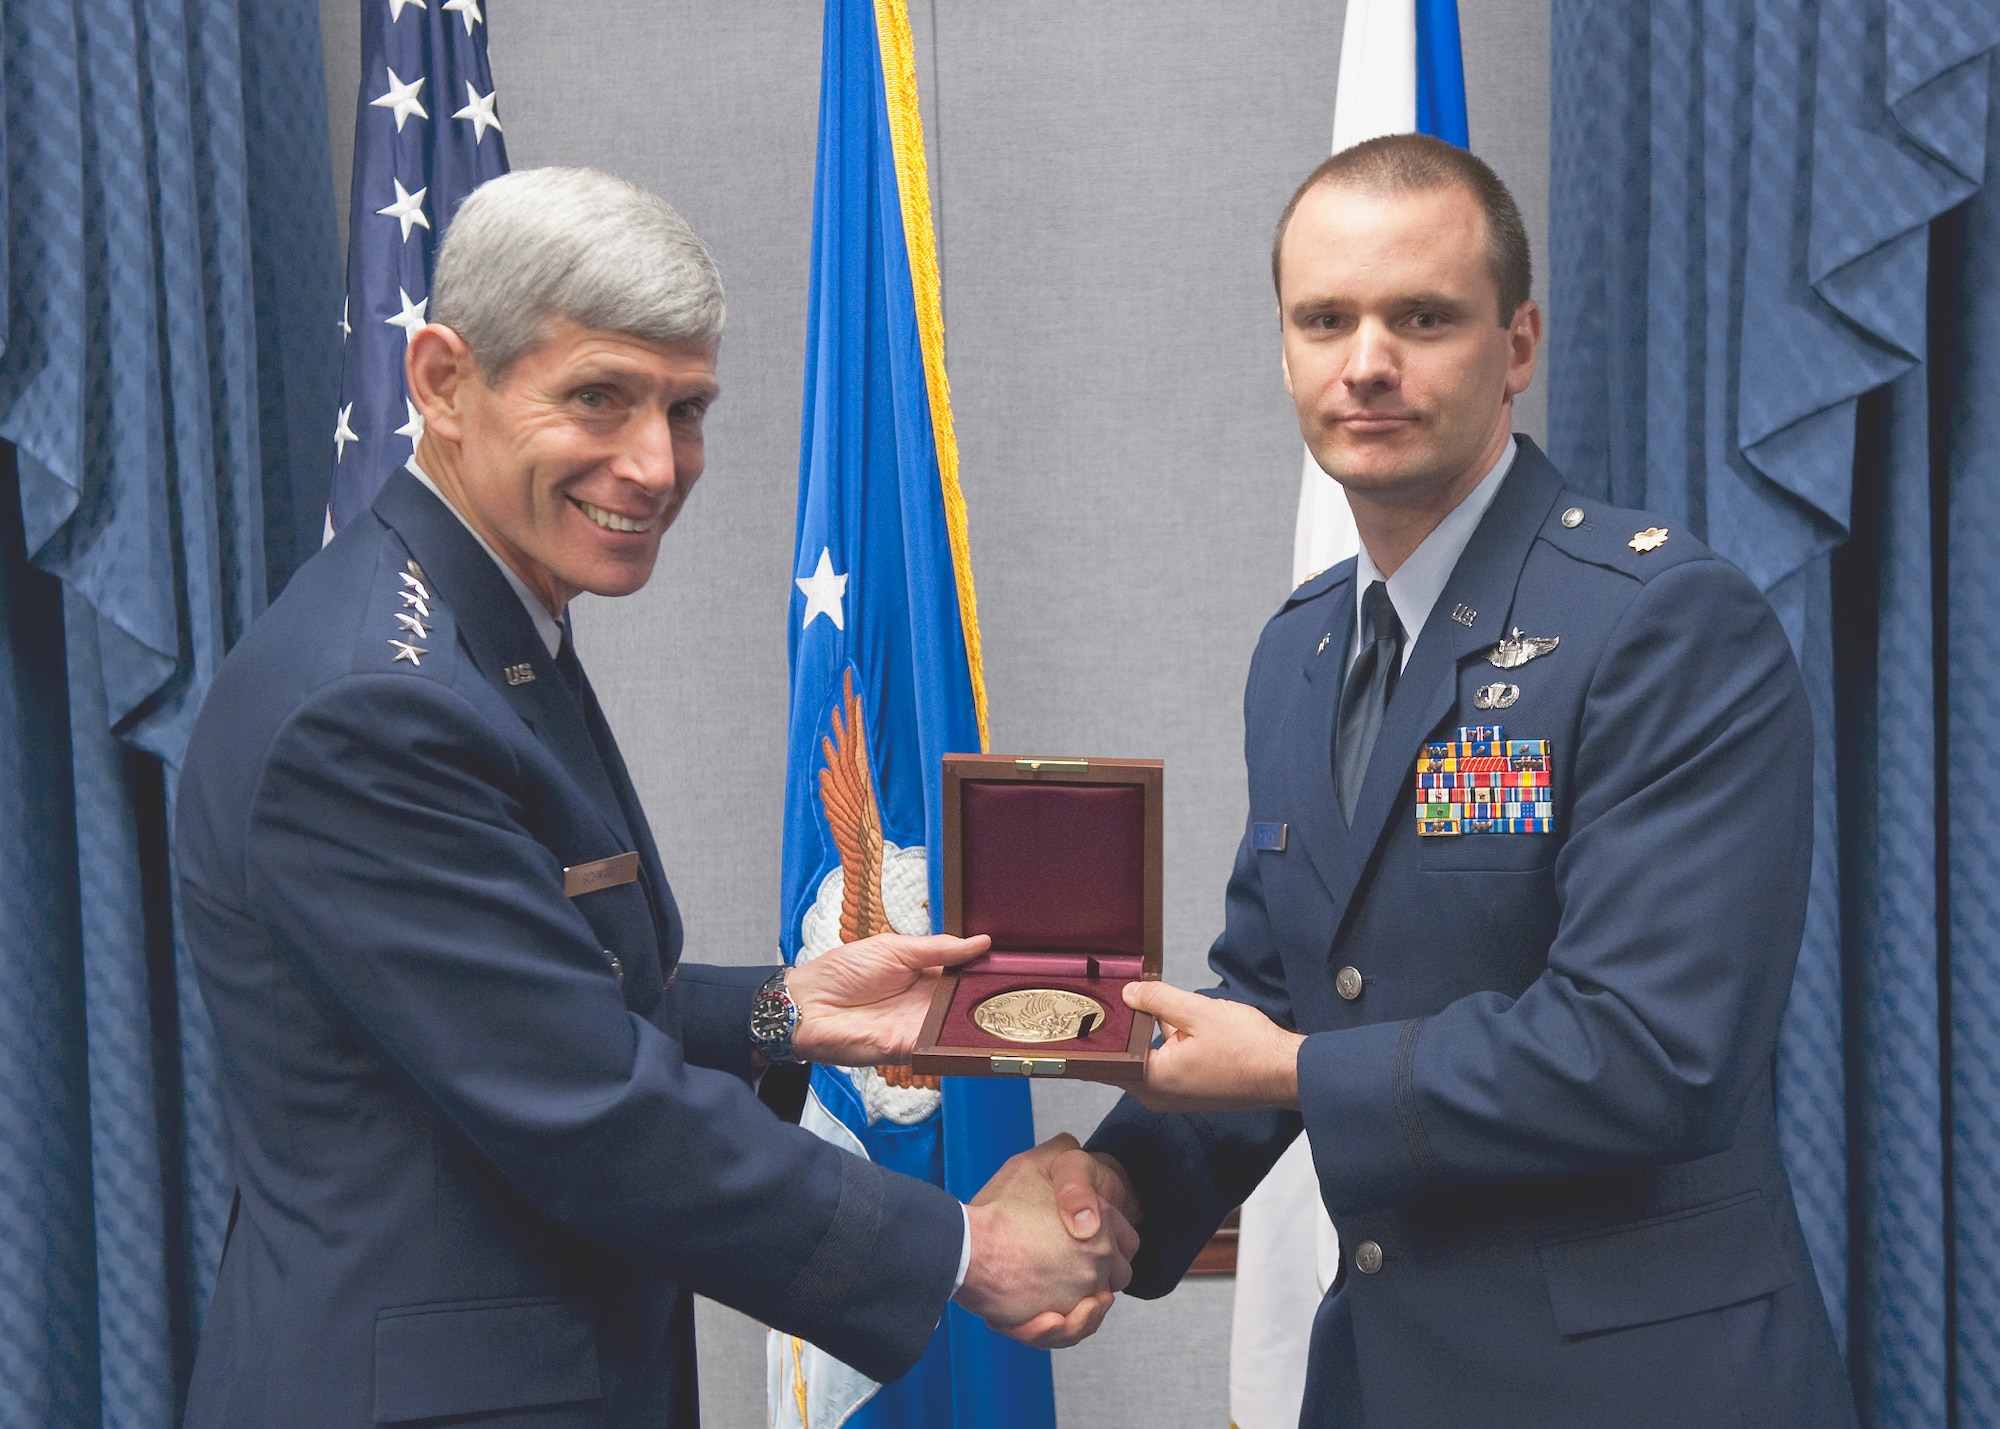 Air Force Chief of Staff Gen. Norton Schwartz presents Maj. John G. Mangan with the Cheney Award Oct. 15, 2010, at the Pentagon. Major Mangan received the award for his actions as the pilot of an HH-60 Pave Hawk on a rescue mission in Helmland Valley, Afghanistan.  Without ground communications or airborne support, Major Mangan managed to land and save the lives of two critically injured Marines under intense enemy fire. The Cheney Award is presented each year to aviators who demonstrate an act of valor, extreme fortitude or self-sacrifice in a humanitarian venture. Established in 1927, the award is in memory of 1st Lt. William Cheney, who was killed in an air collision over Italy in 1918. Major Mangan is currently assigned to Nellis Air Force Base, Nev. (U.S. Air Force photo/Jim Varhegyi) 